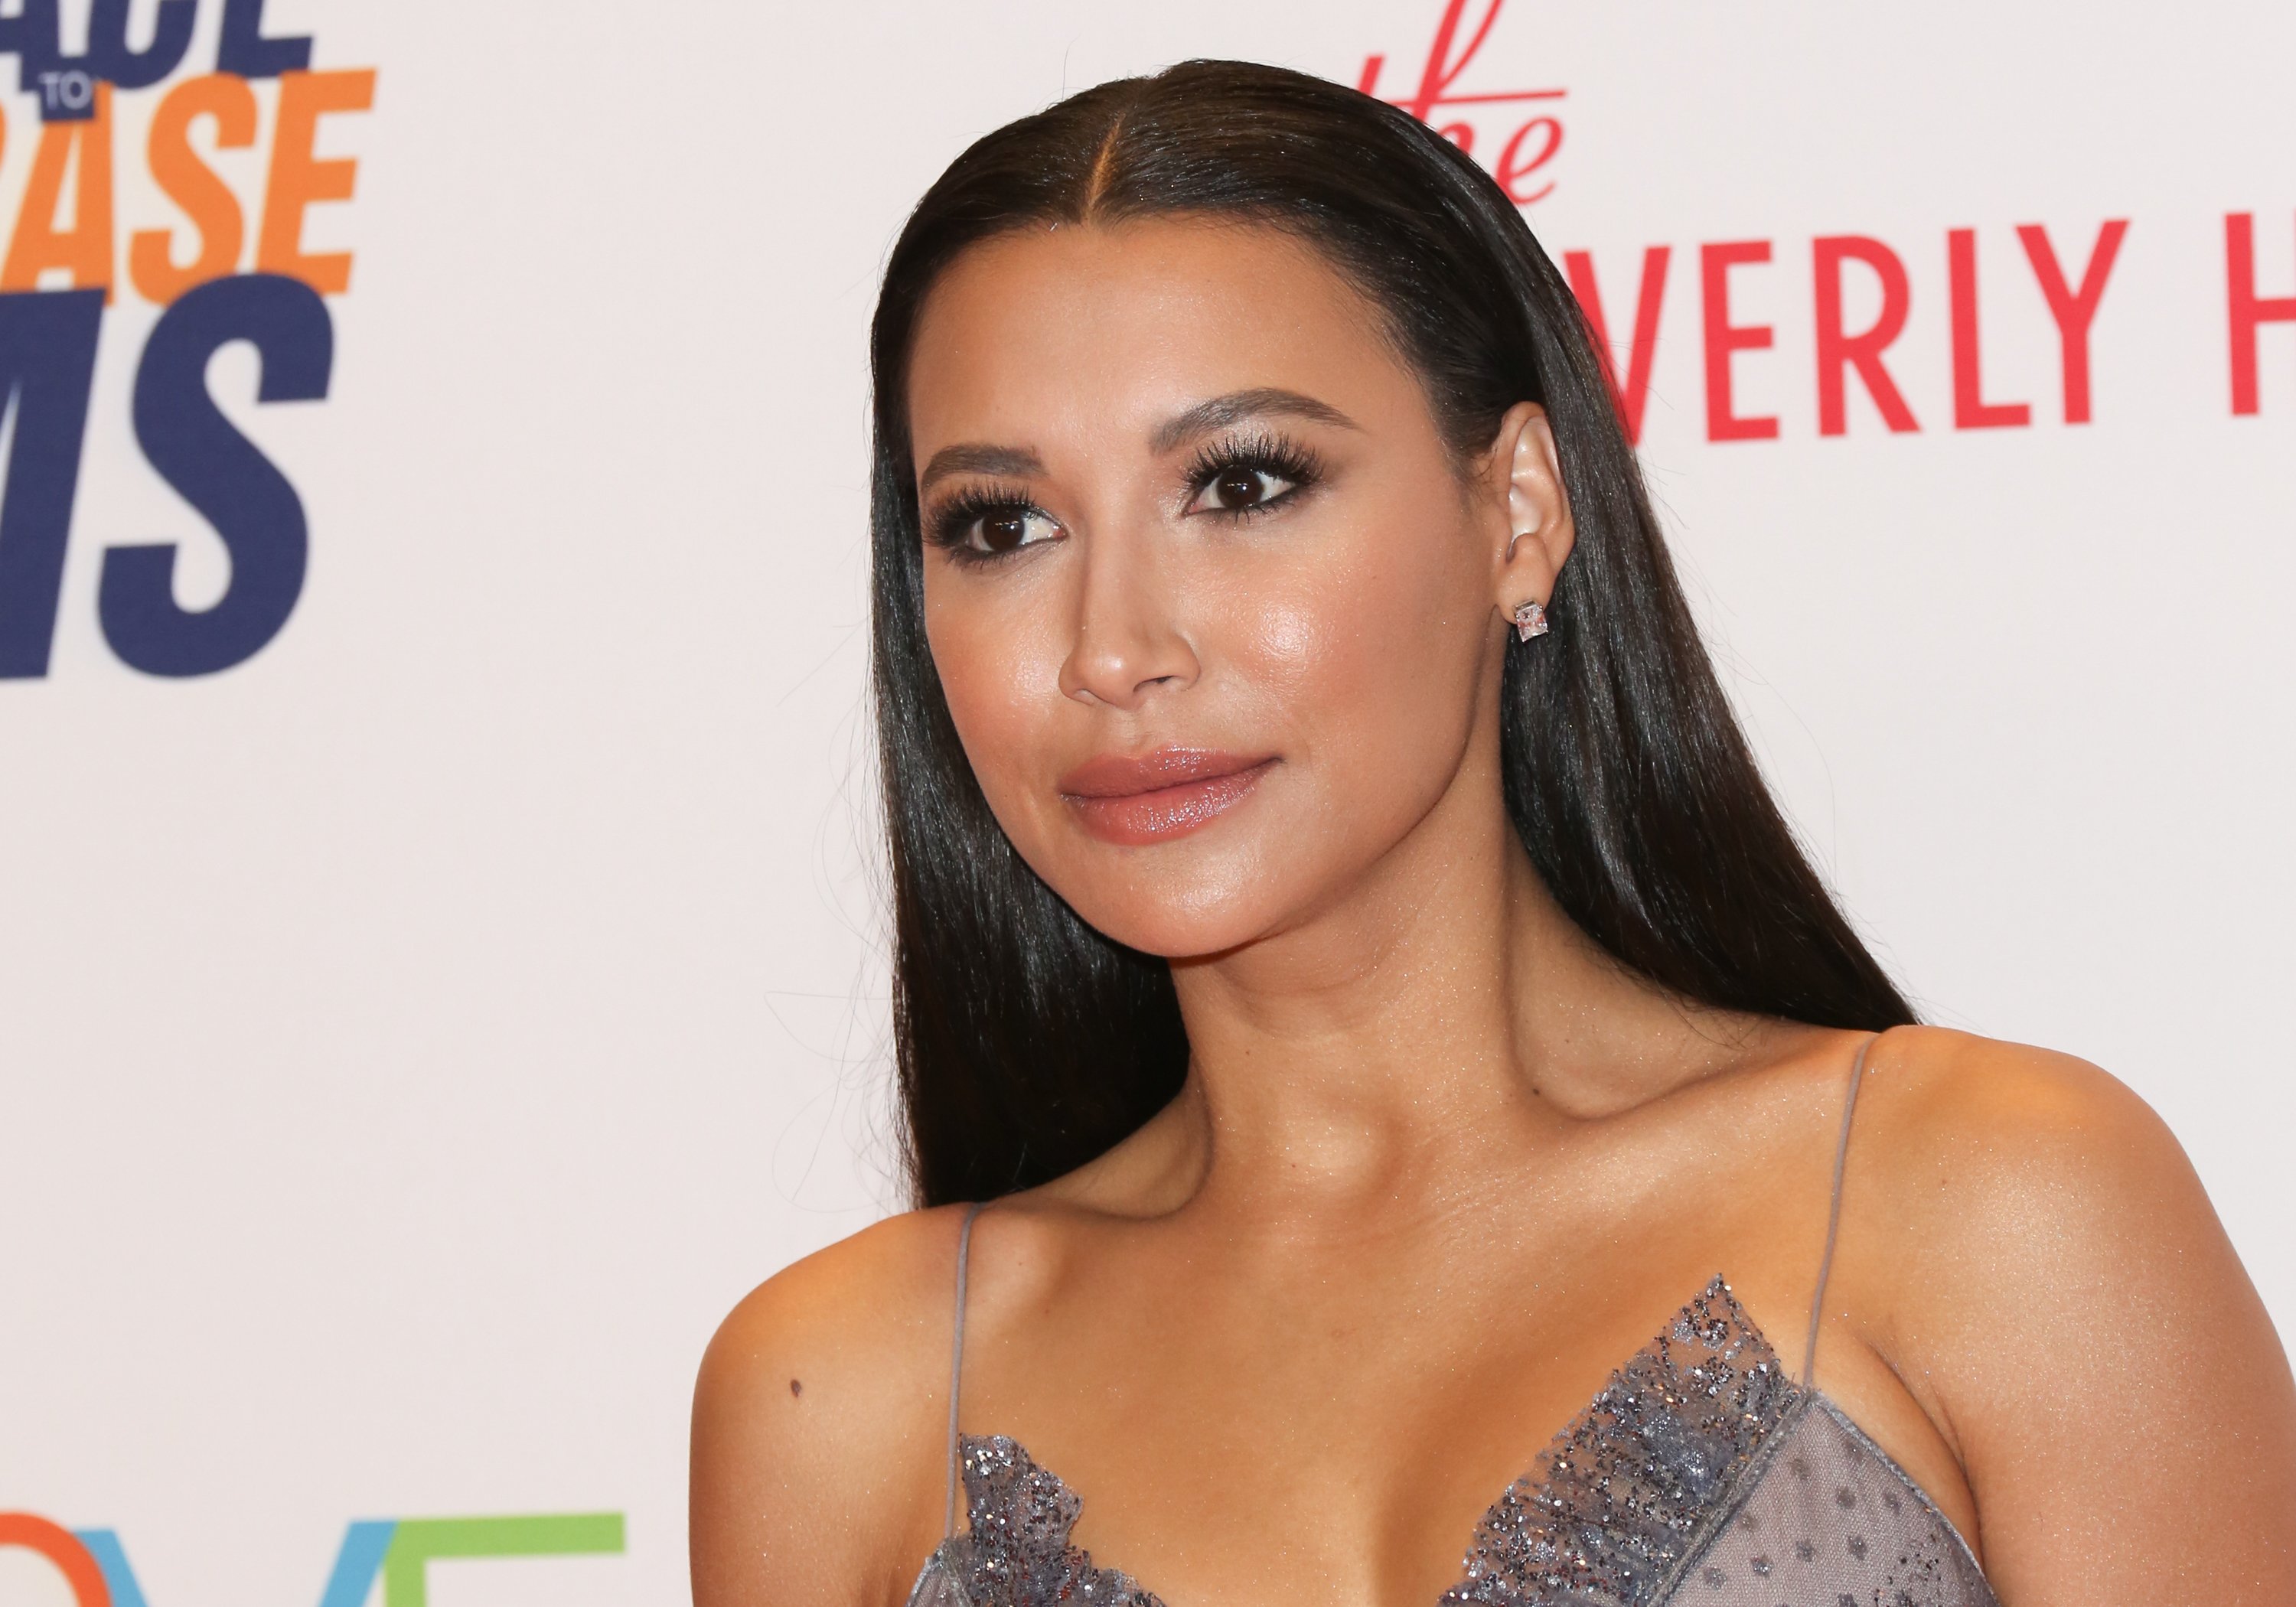 Naya Rivera attends the 24th annual Race to Erase MS gala at the Beverly Hilton hotel on May 5, 2017. | Photo: Getty Images